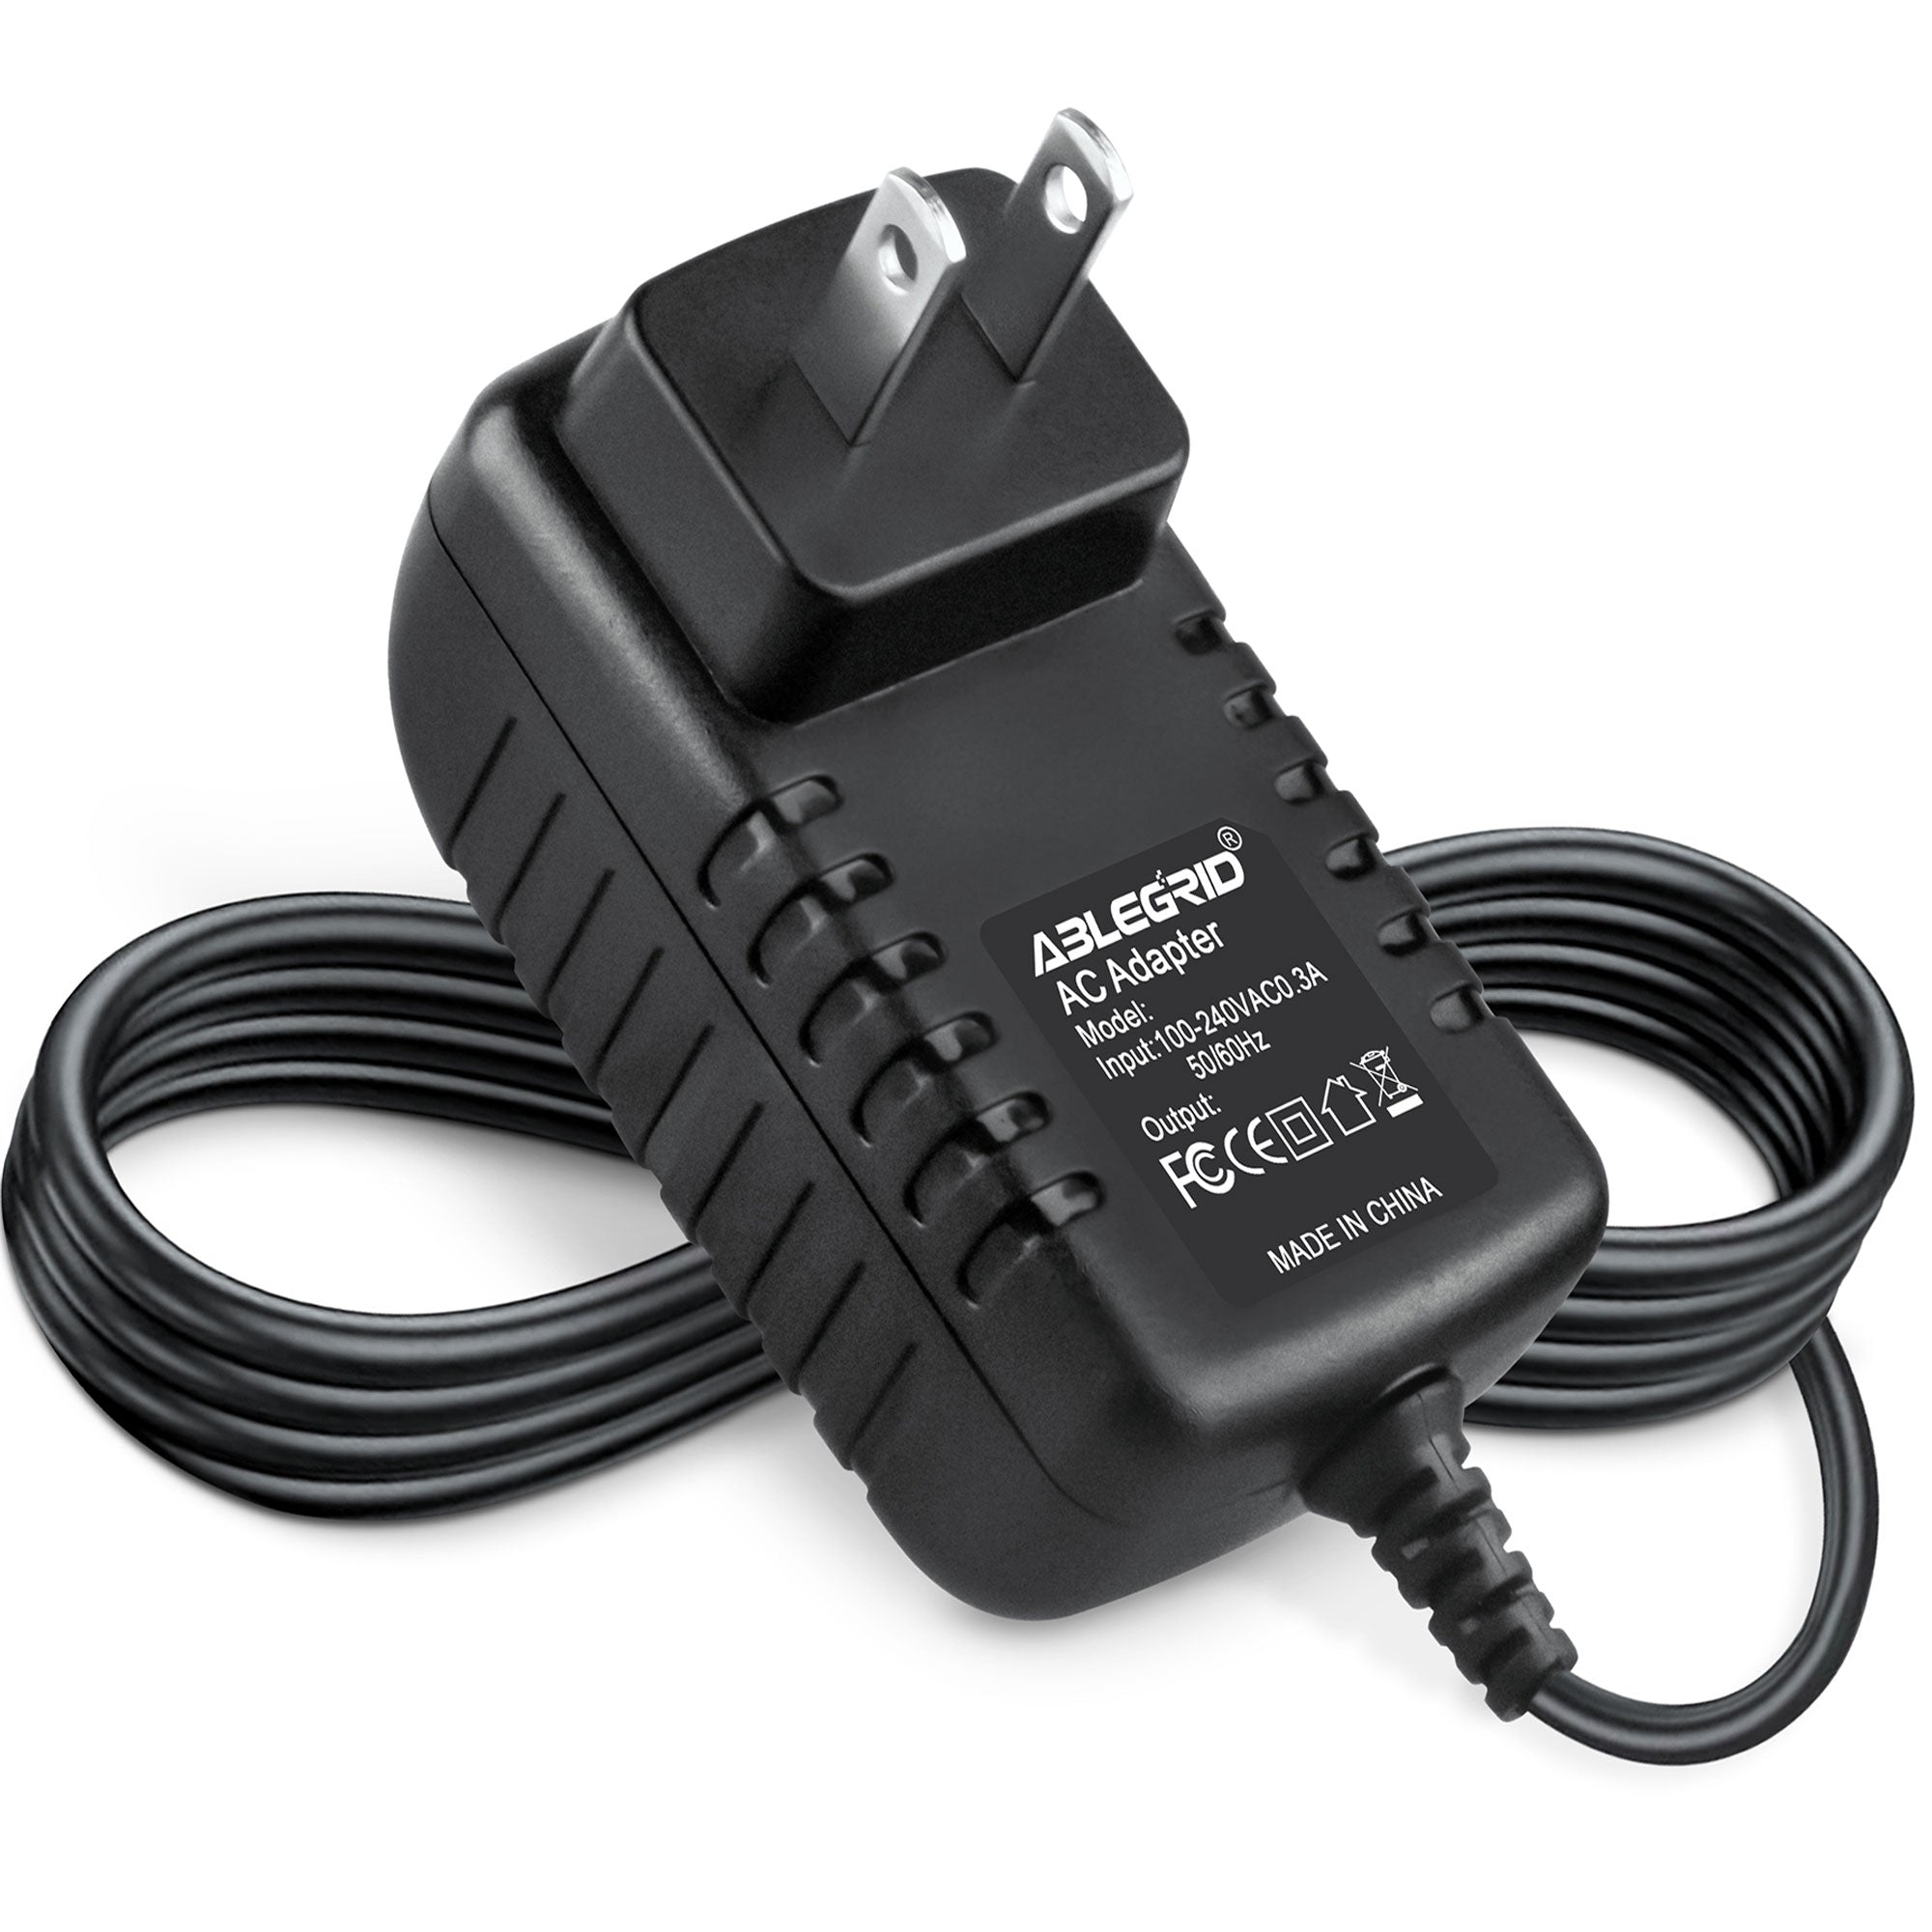 AbleGrid AC-DC Adapter Charger for TECSUN DC-06 PL660 PL450 Rechargeable Radio Power Supply